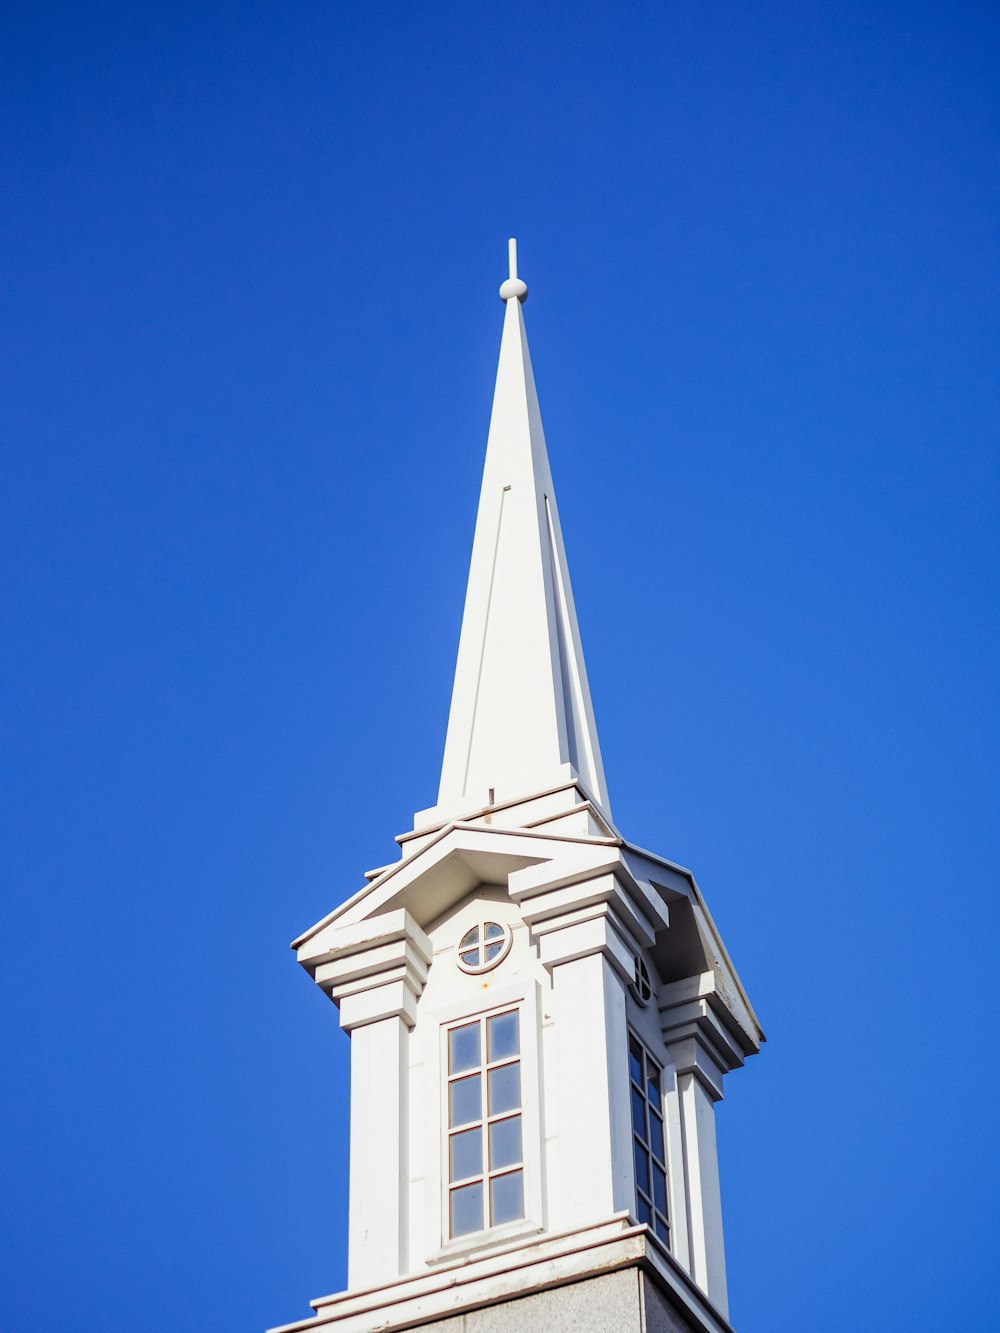 a white steeple with a clock on it against a blue sky